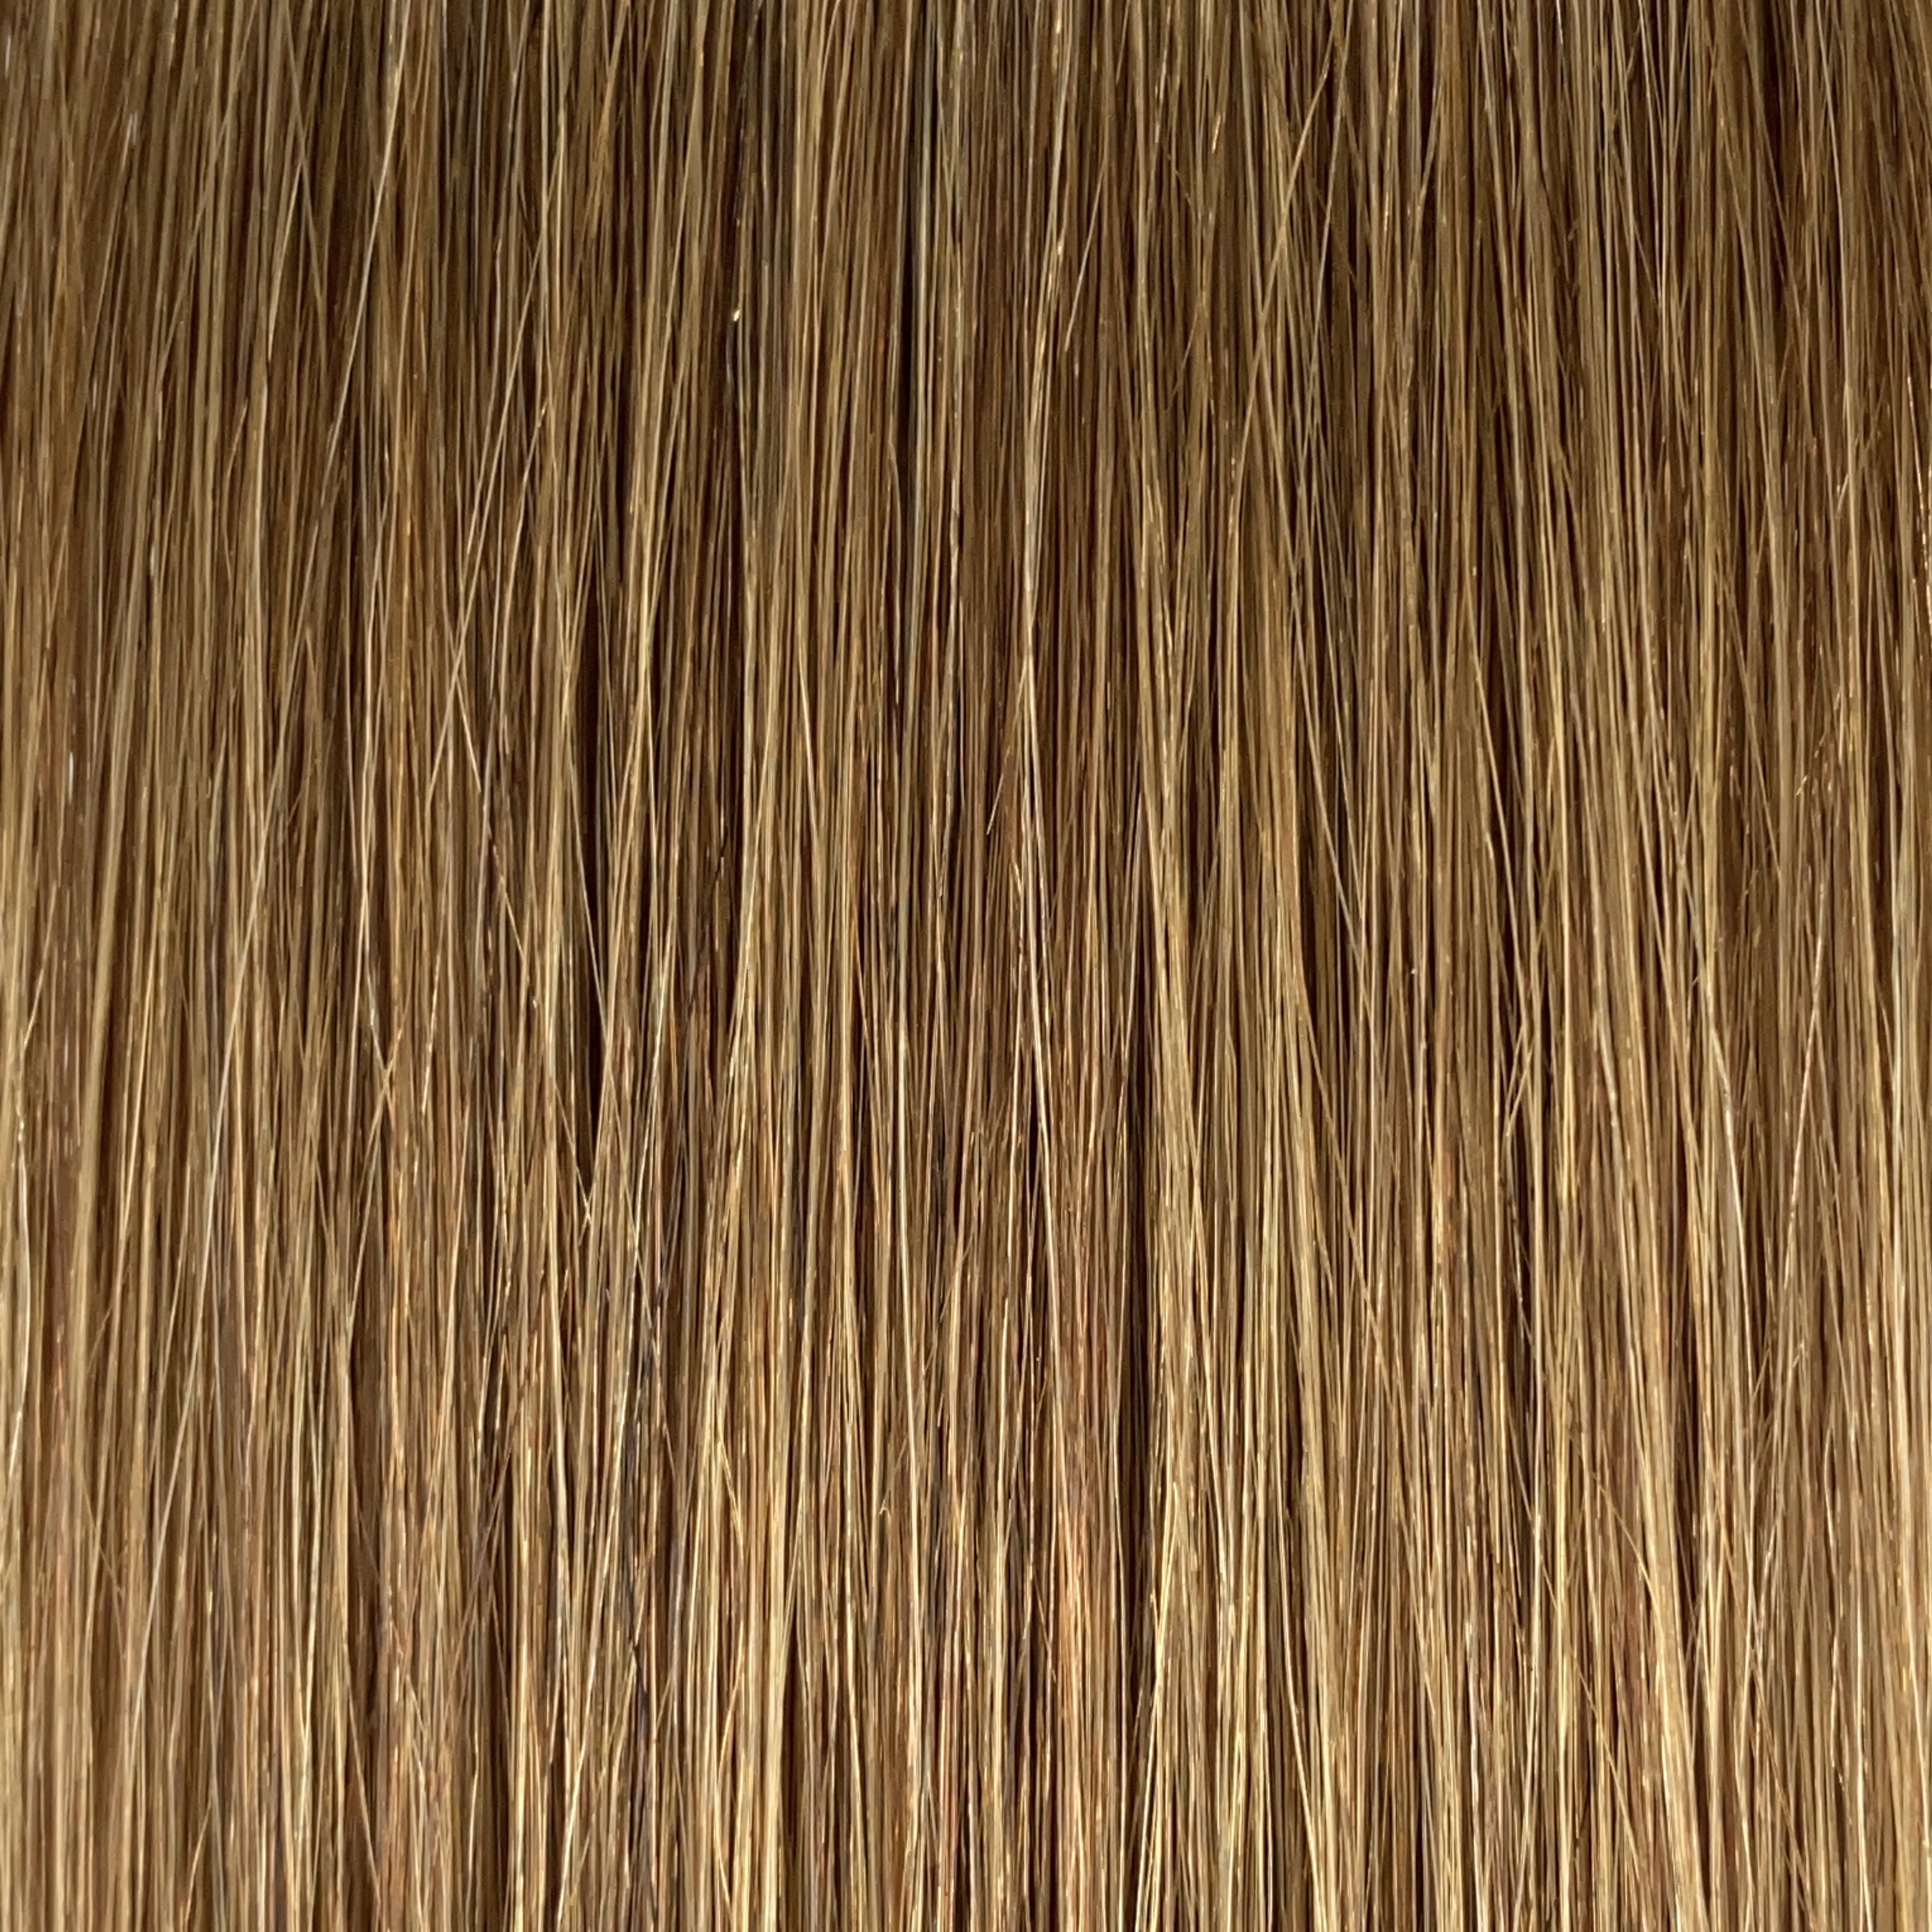 40 cm | Normal Tape Extensions | No. 08 light brown